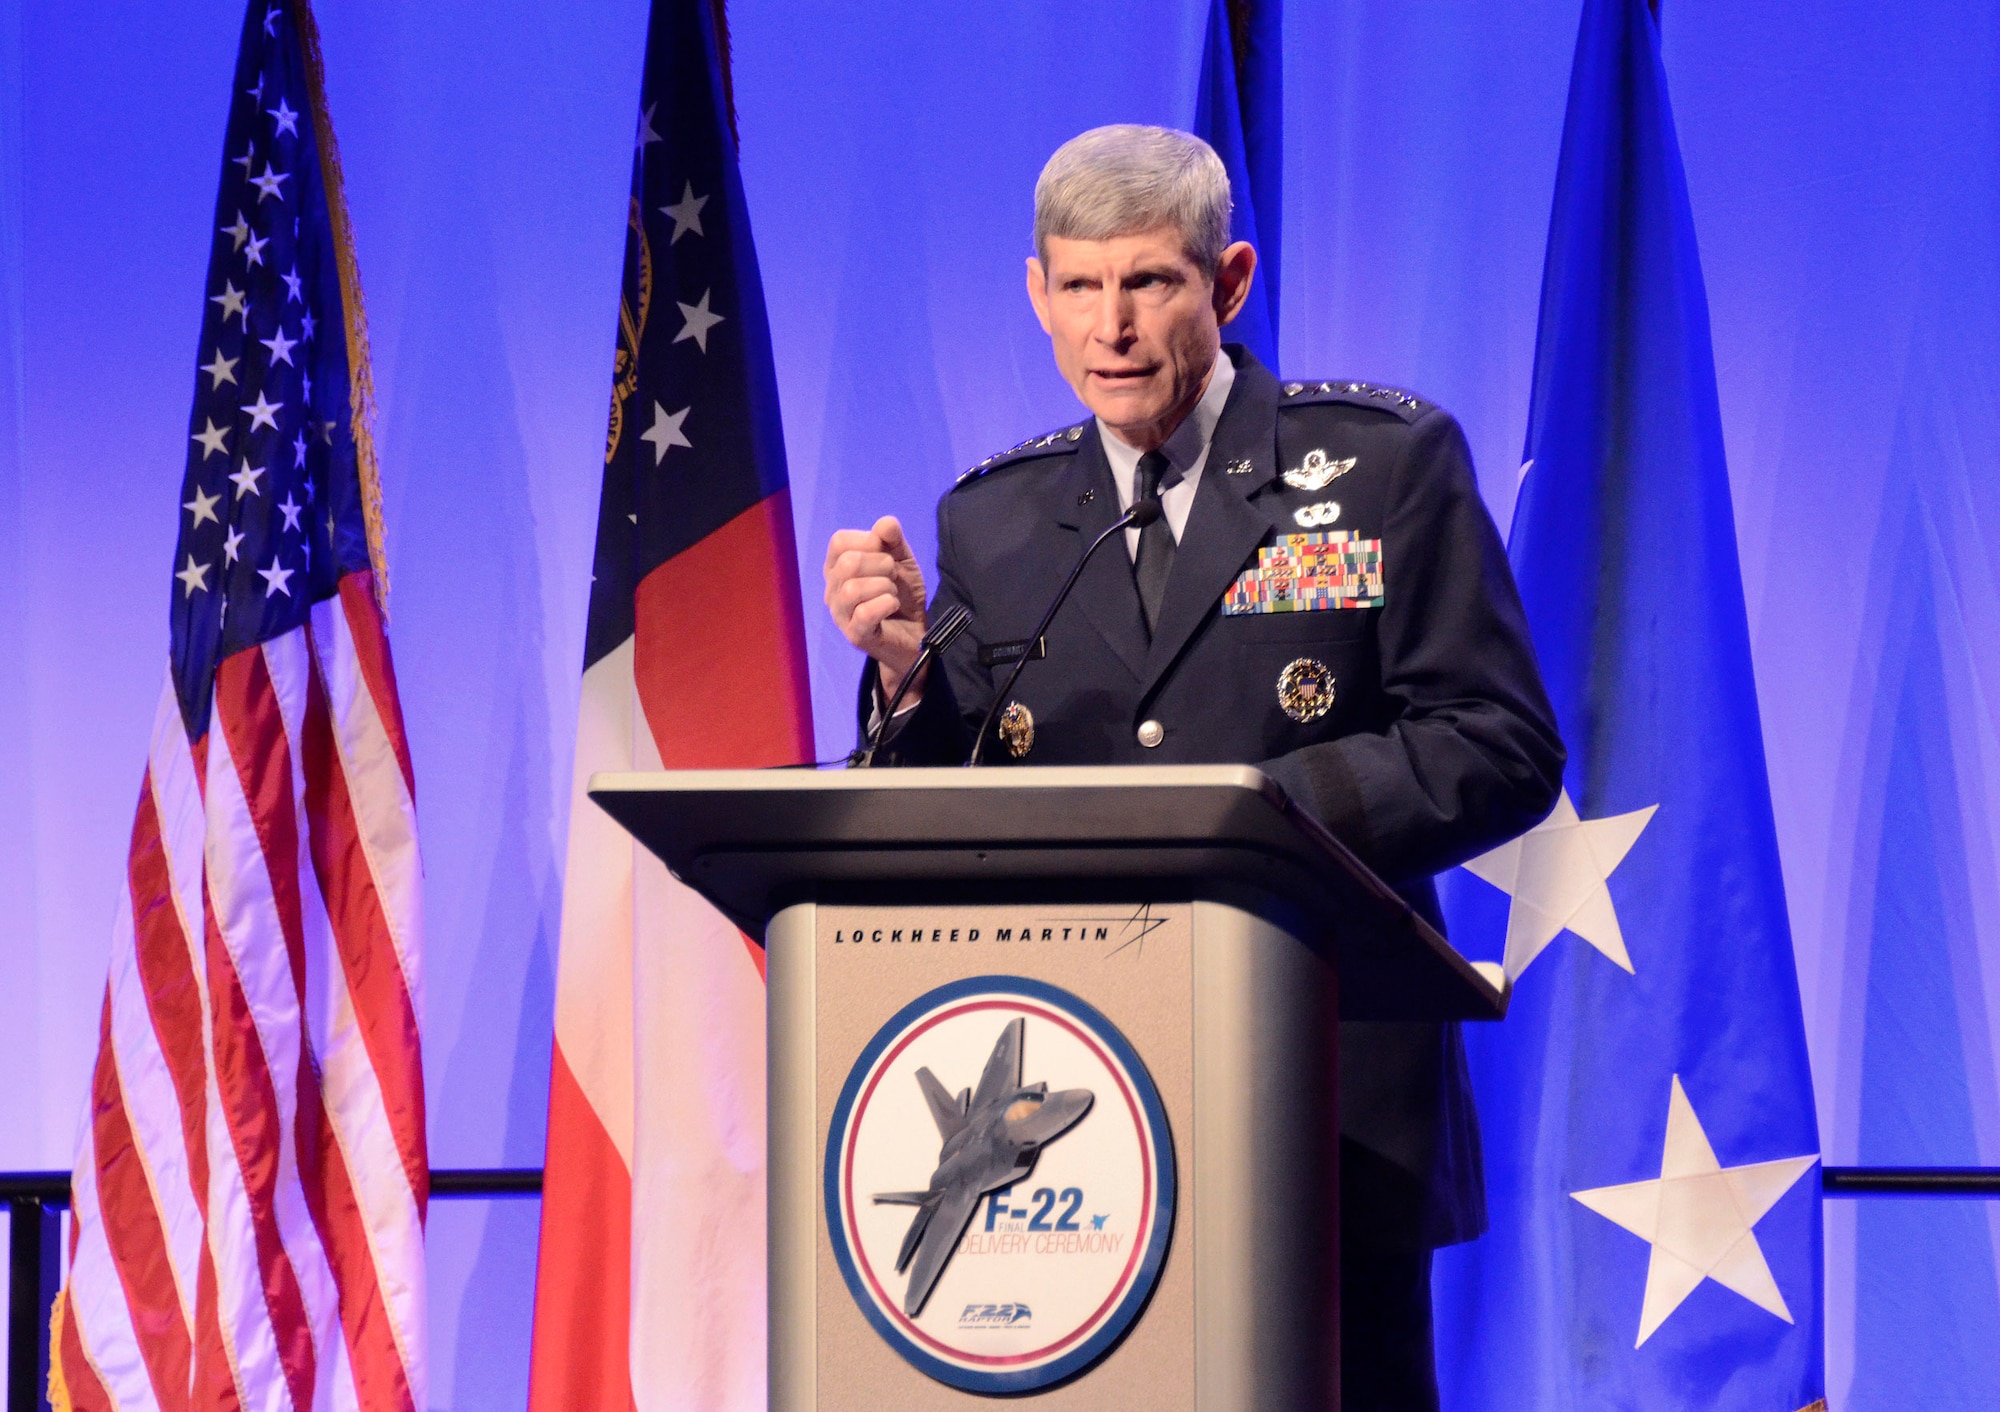 Air Force Chief of Staff, Gen. Norman A. Schwartz, speaks about the significance of the F-22 Raptor during a formal delivery ceremony at Lockheed Martin Aeronautics Company, Marietta, Ga., May 2. The last production aircraft, number 4195, was flown to Joint Base Elmendorf-Richardson, Alaska, by Lt. Col. Paul Moga, 525th Fighter Squadron commander. (U.S. Air Force photo/ Brad Fallin)